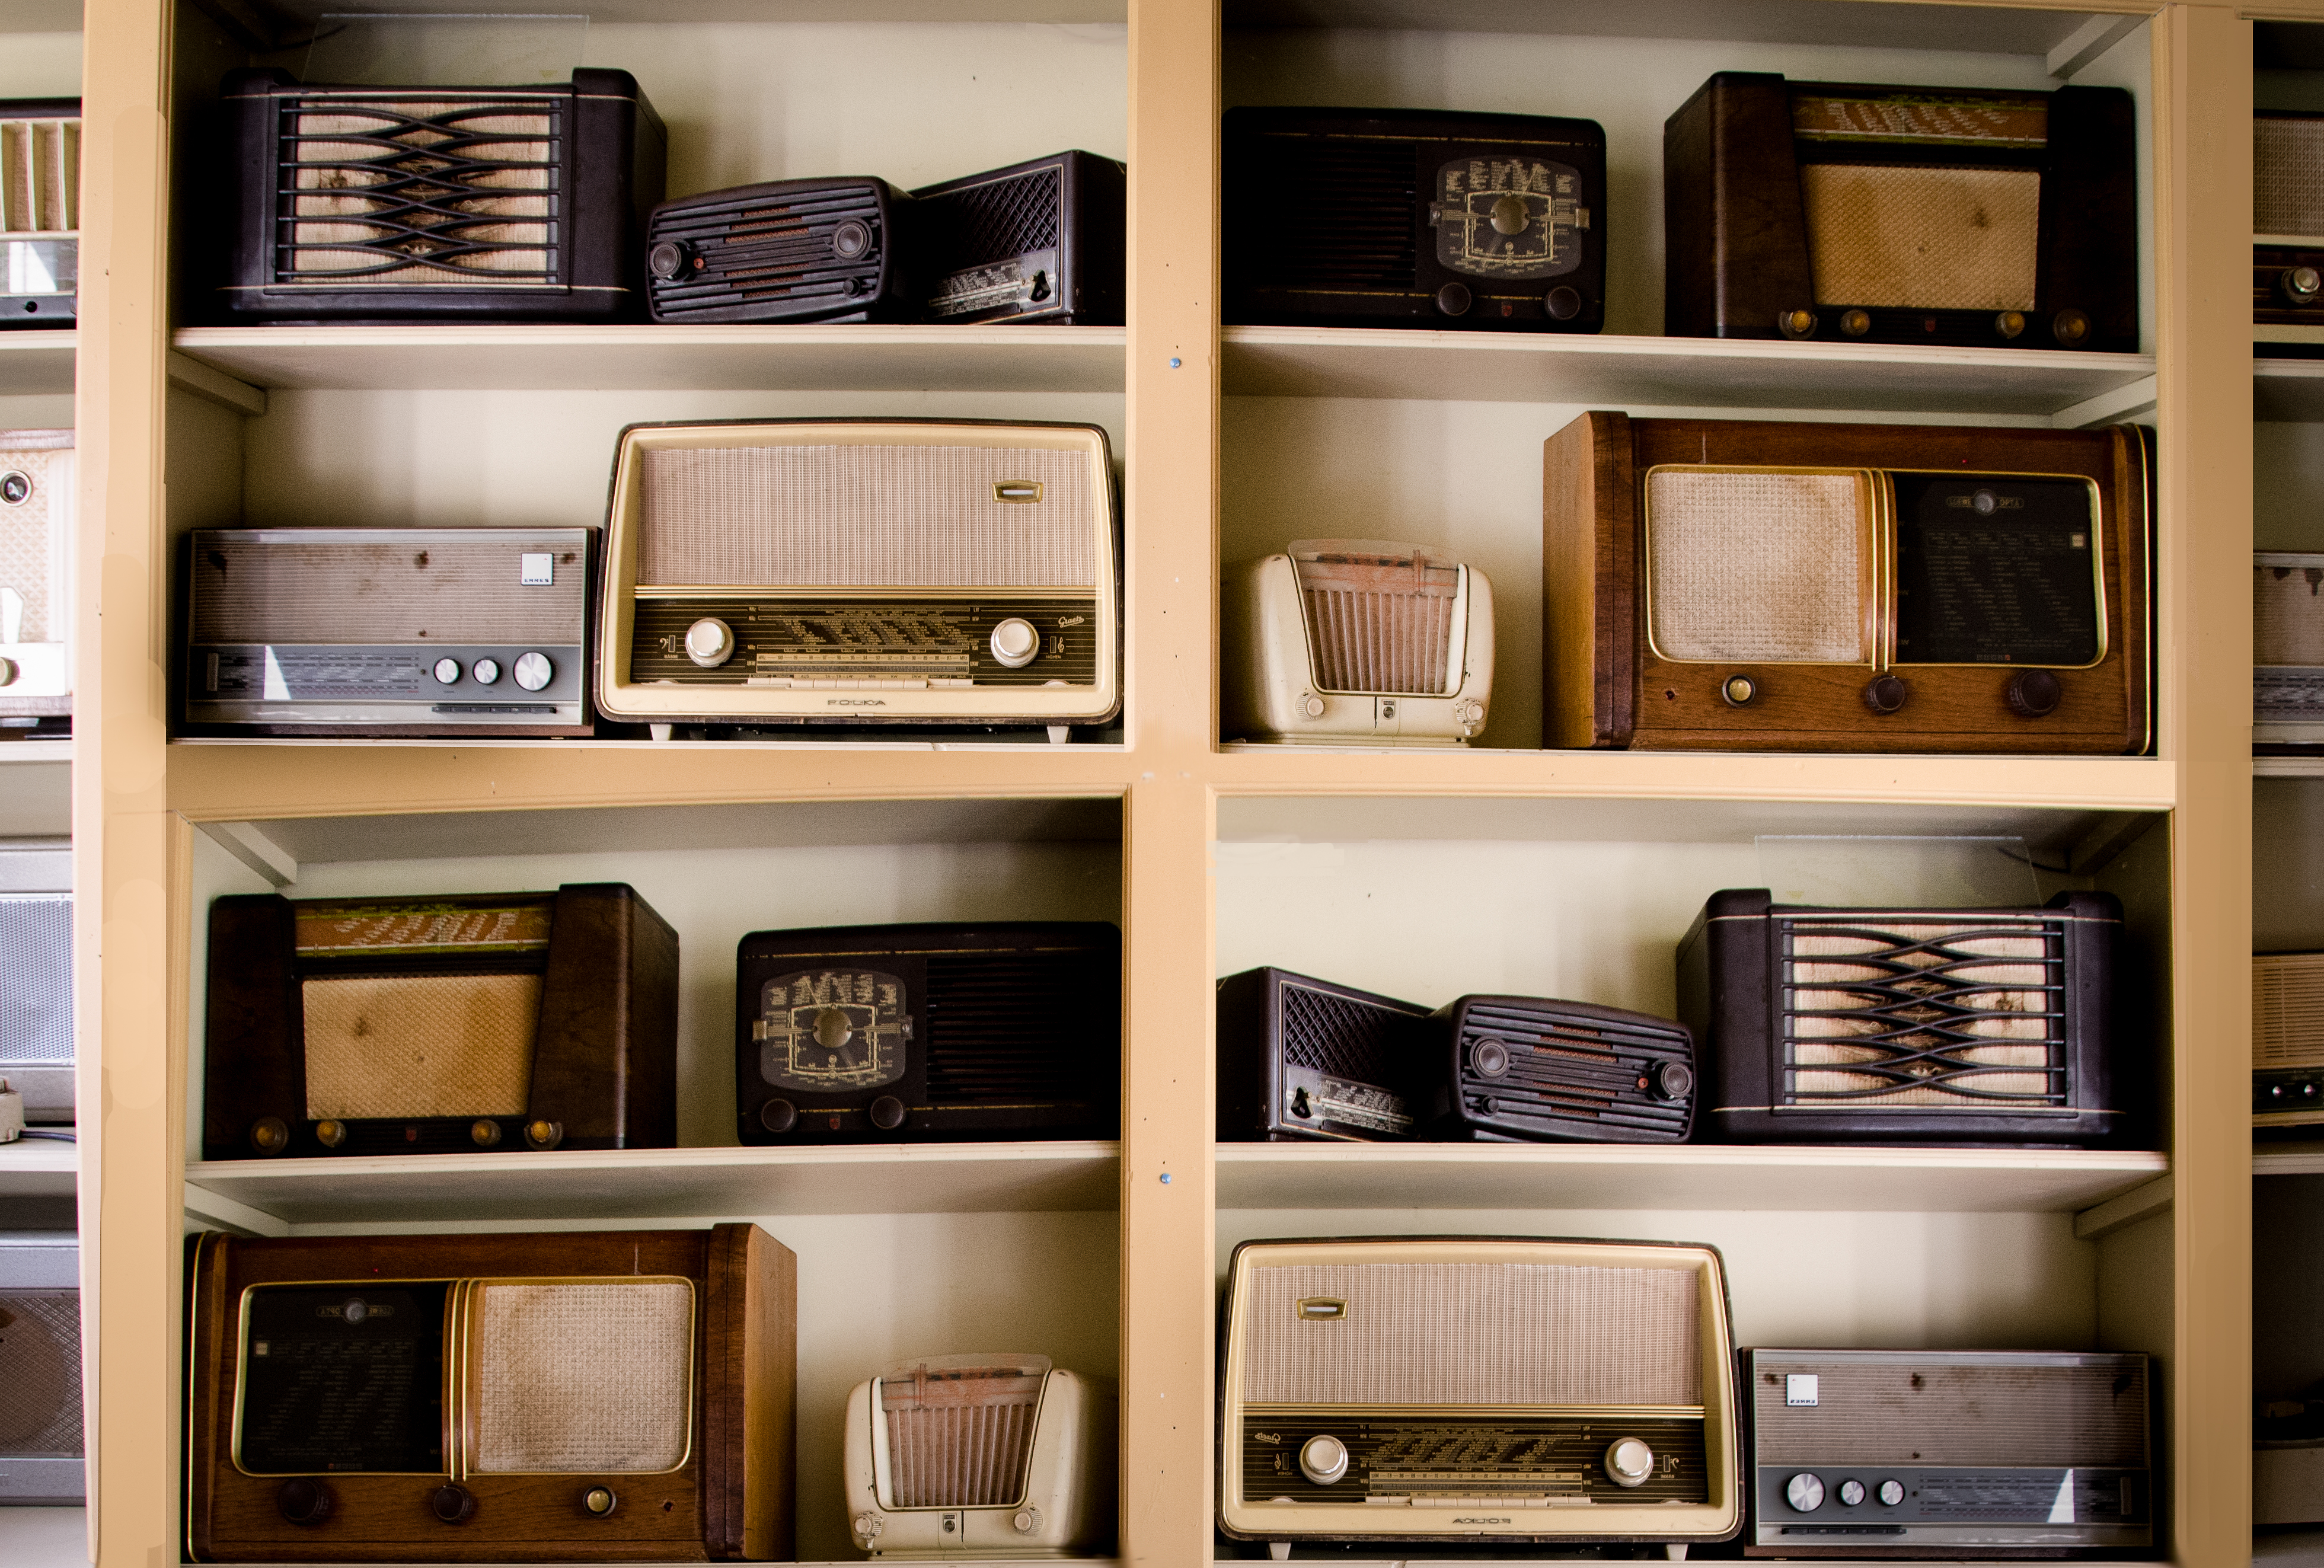 A photo of a shelving set with lots of old fashioned radios